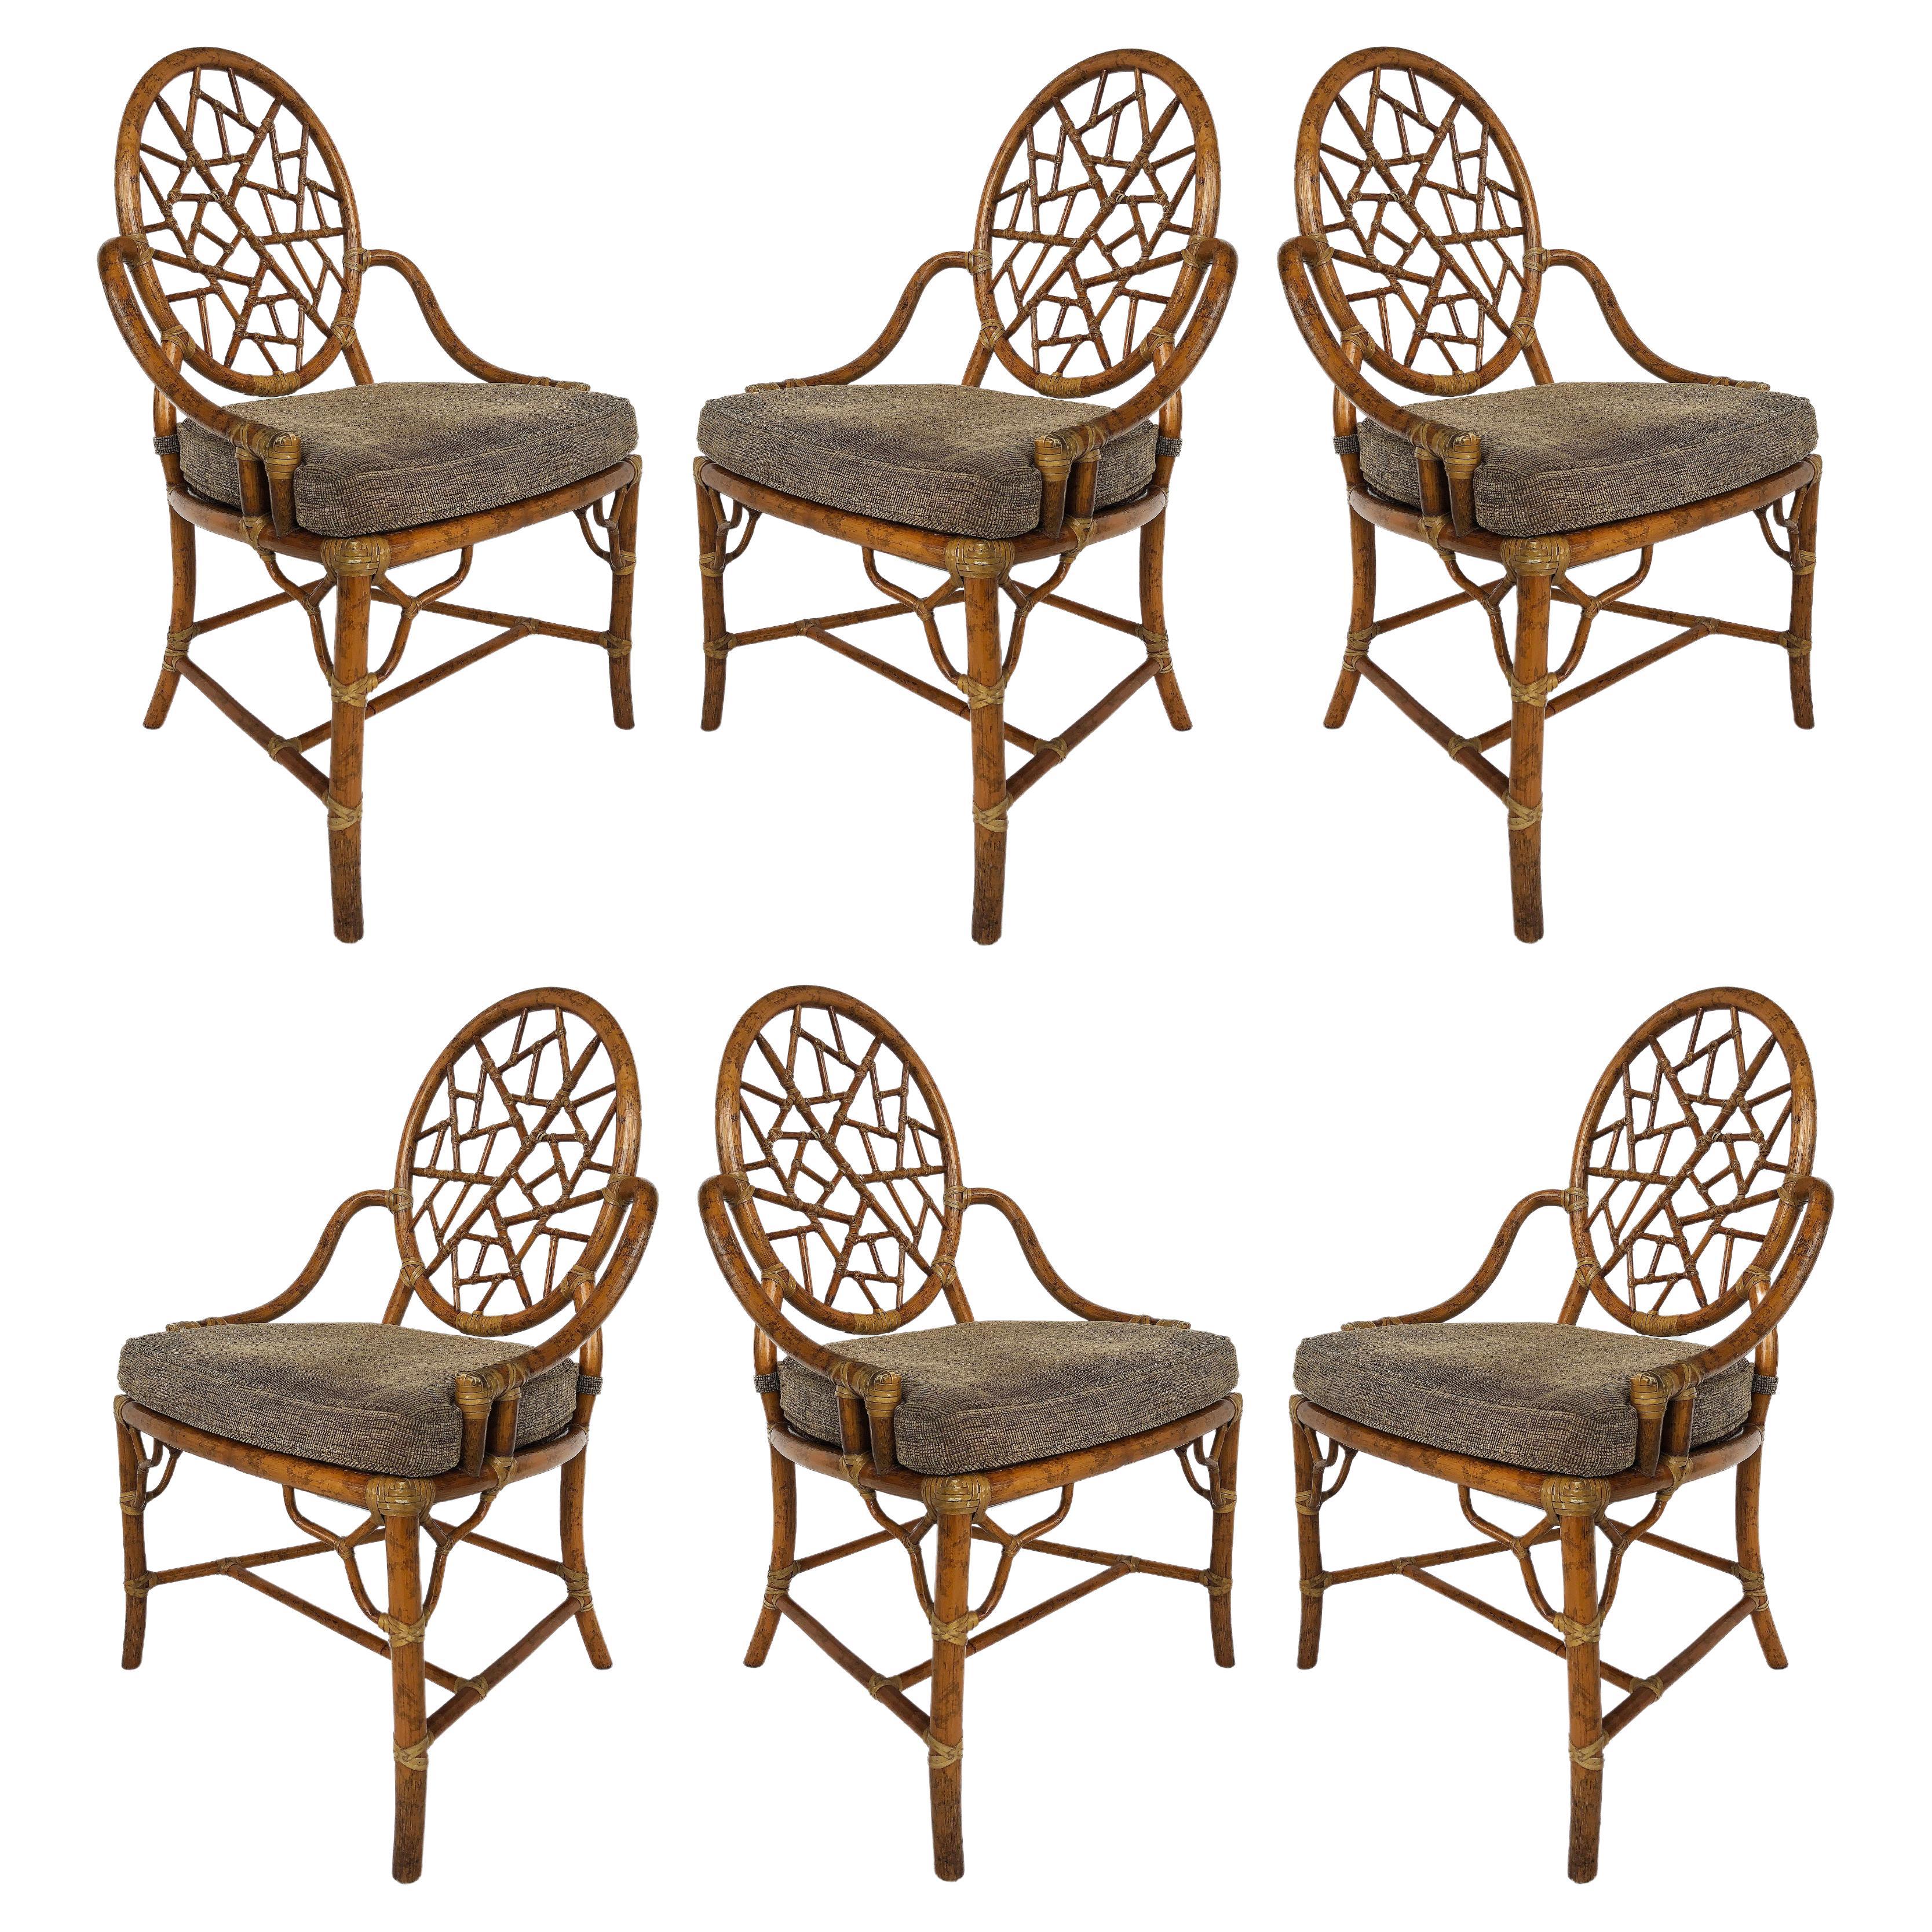 Cracked Ice McGuire Furniture San Francisco Dining Chairs, Set of 6